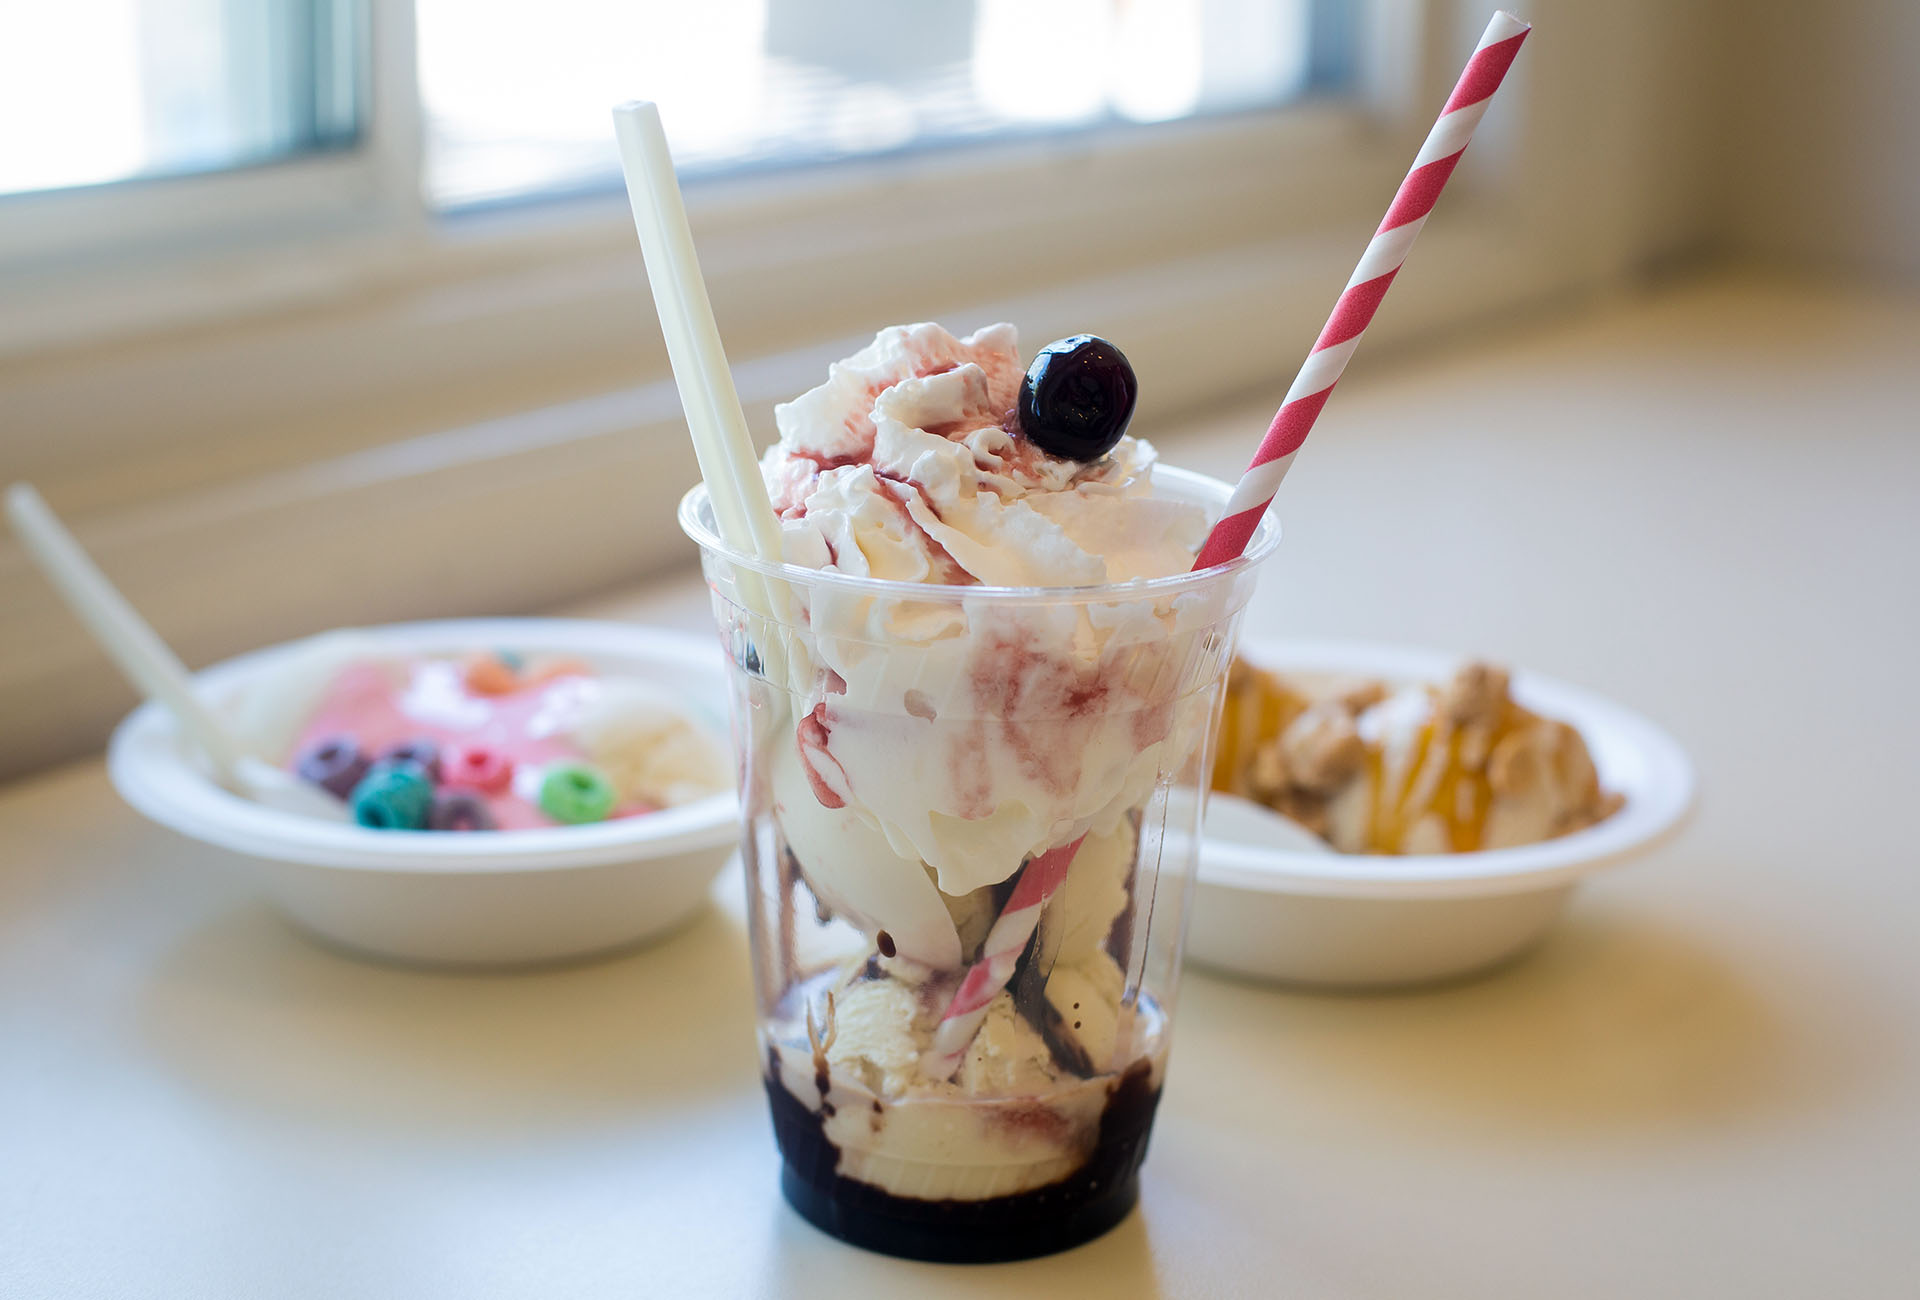 The Hot Mess Sundae, made with vanilla ice cream, butter scotch, marshmallow fluff, and topped with a cherry.